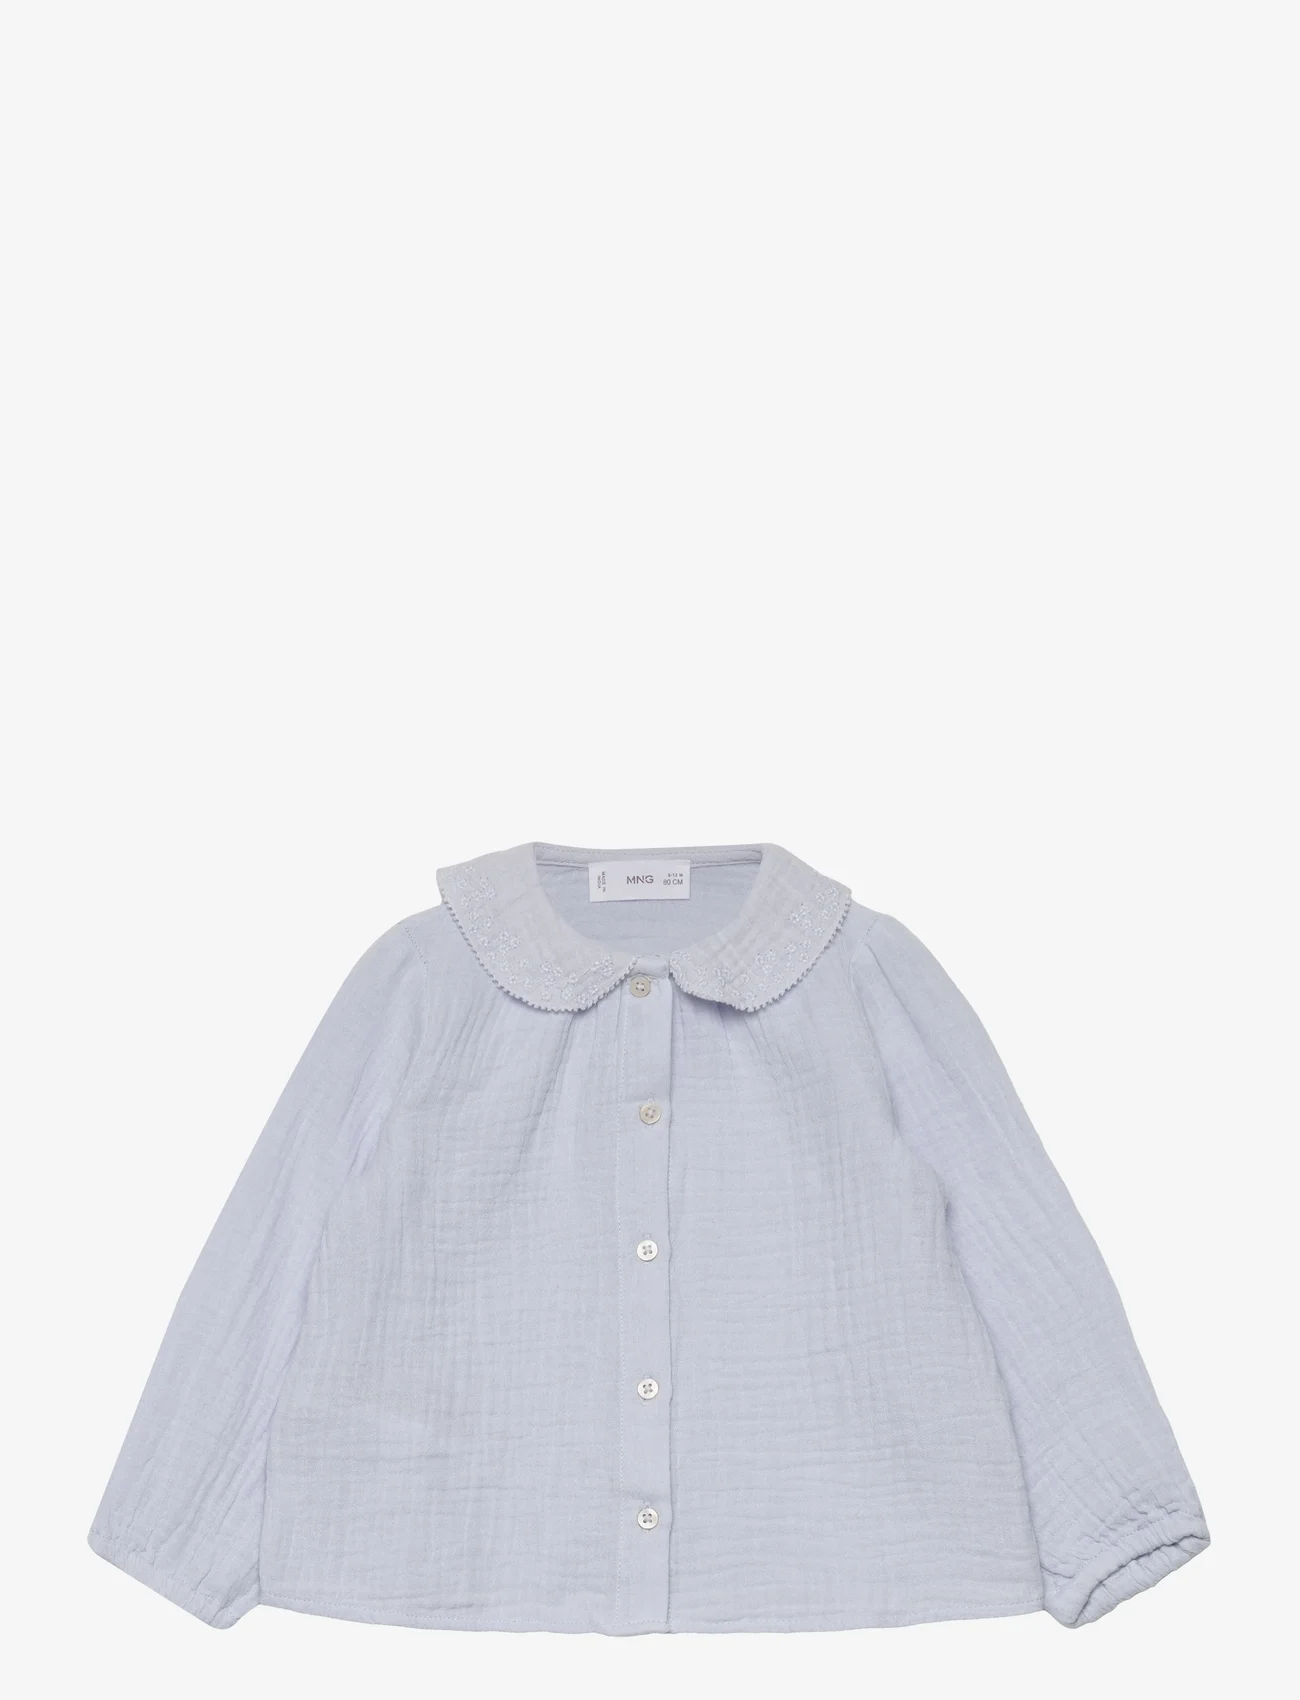 Mango - Cheesecloth cotton blouse - sommarfynd - lt-pastel blue - 0